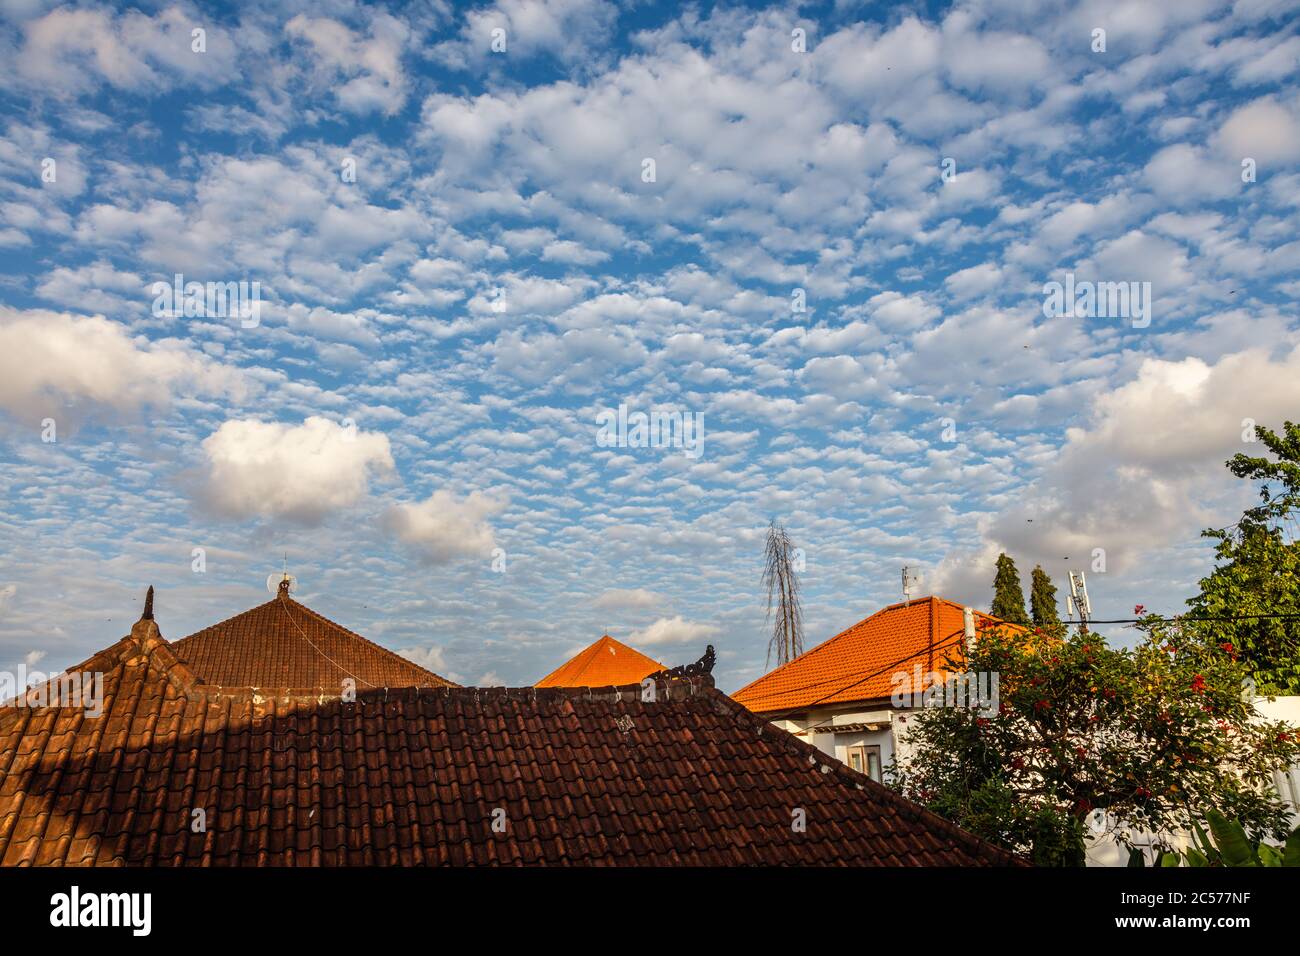 Blue sky with many little white clouds over the roofs of a village. Badung, Bali, Indonesia, Stock Photo